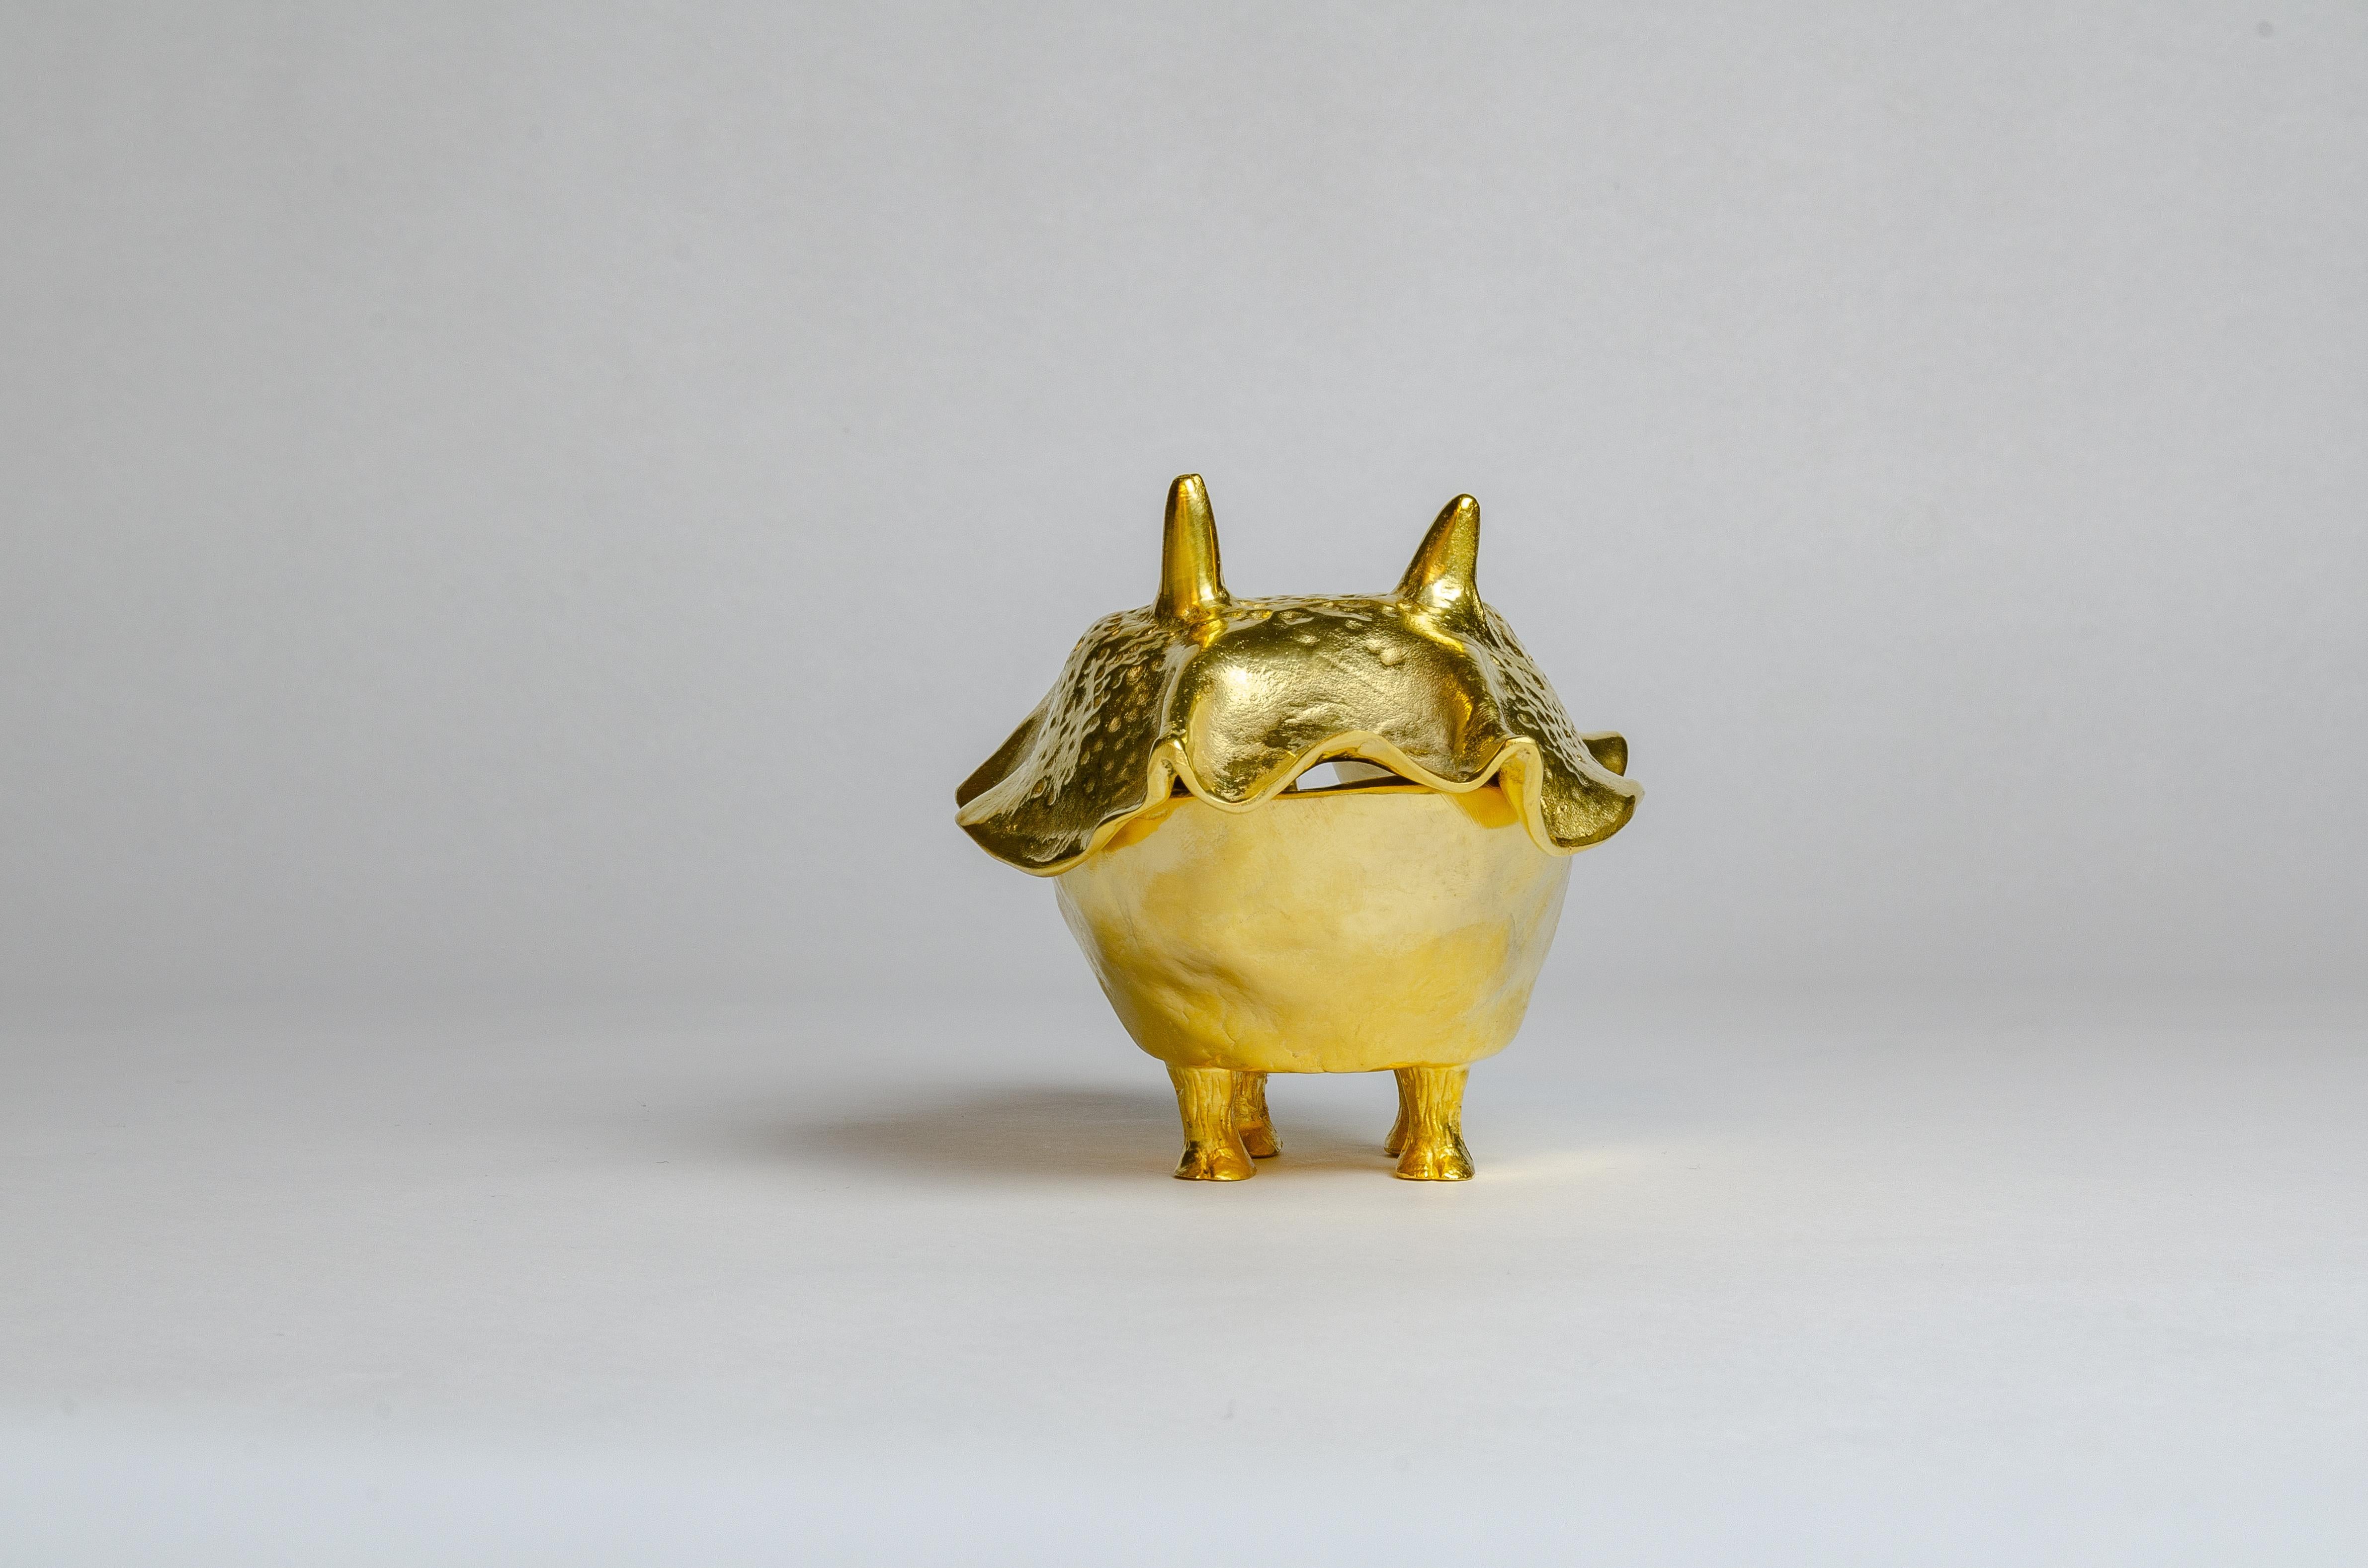 Aldus Collection: An accessory collection made in collaboration between Achille Salvagni and Fabio Gnessi
Amphibious
2013
24ct gold-plated, antiqued finish cast bronze condiment server with spoon. Drawing inspiration from the Hippopotamus Amphibius